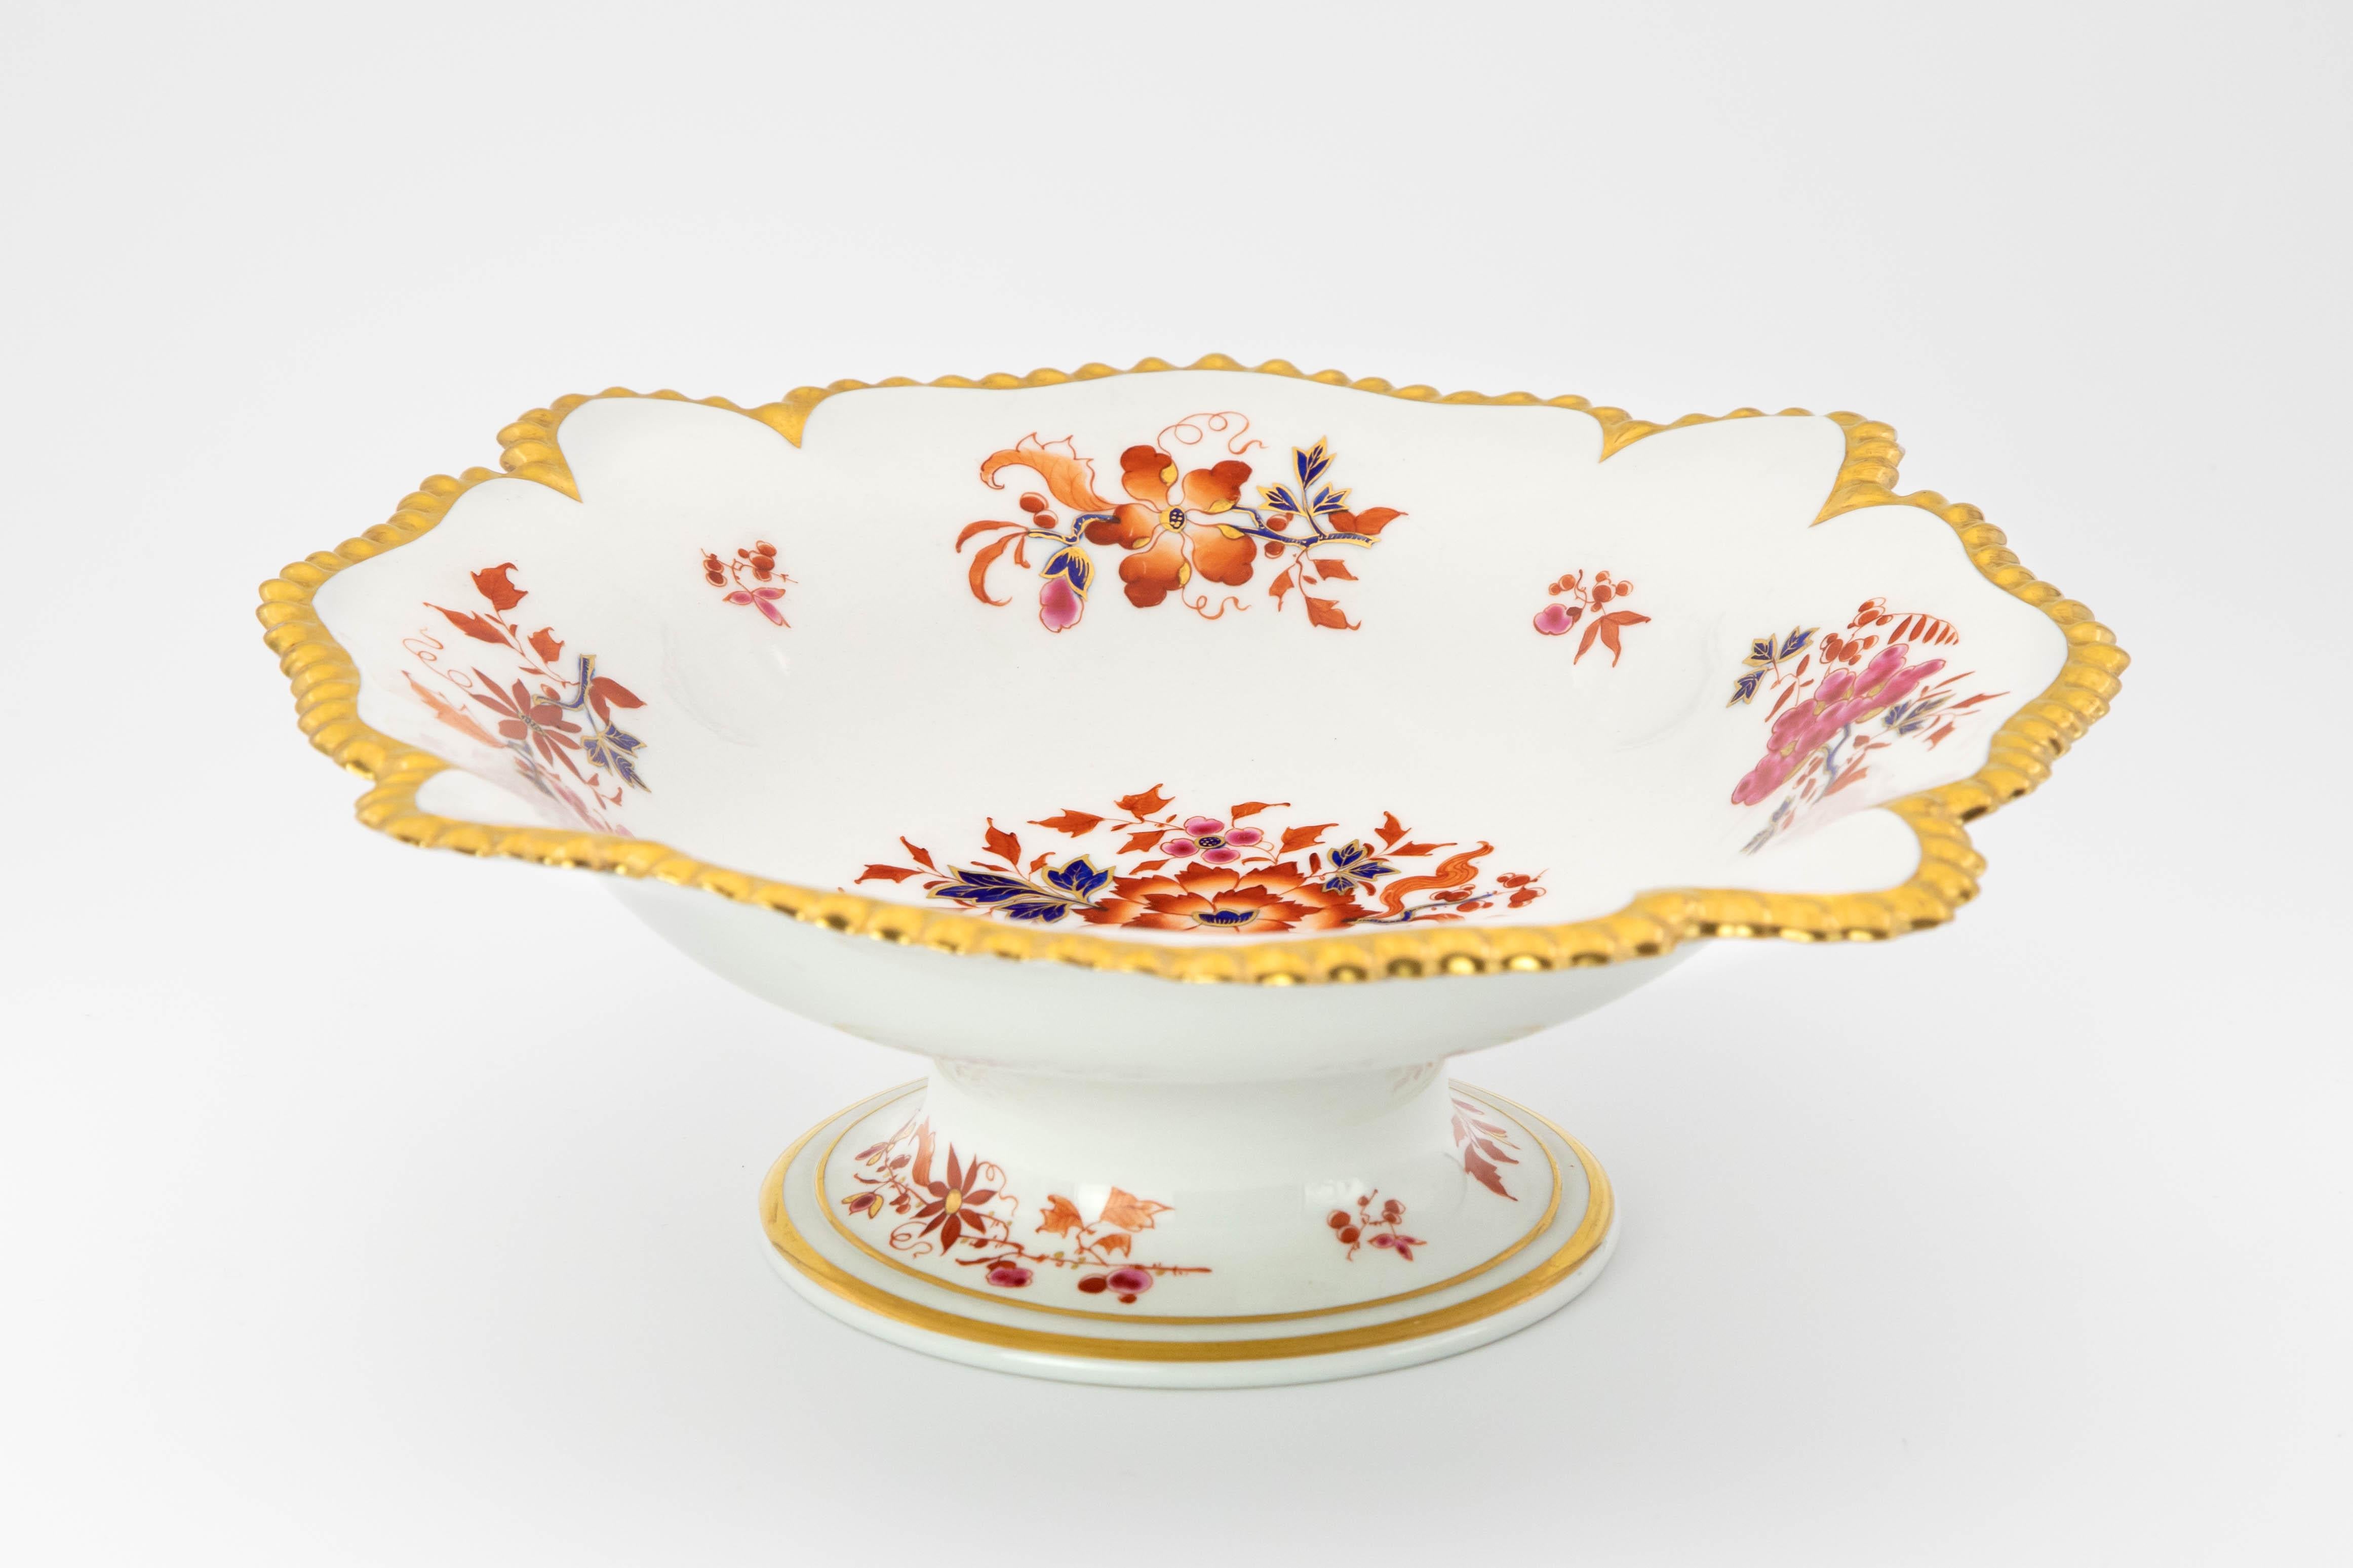 A set of 4 armorial dessert dishes and 1 compote, made circa 1820 by the Worcester Porcelain Factory during the Flight, Barr & Barr period.

The dishes, made circa 1820 by the Worcester Porcelain Factory during the Flight, Barr & Barr period, are